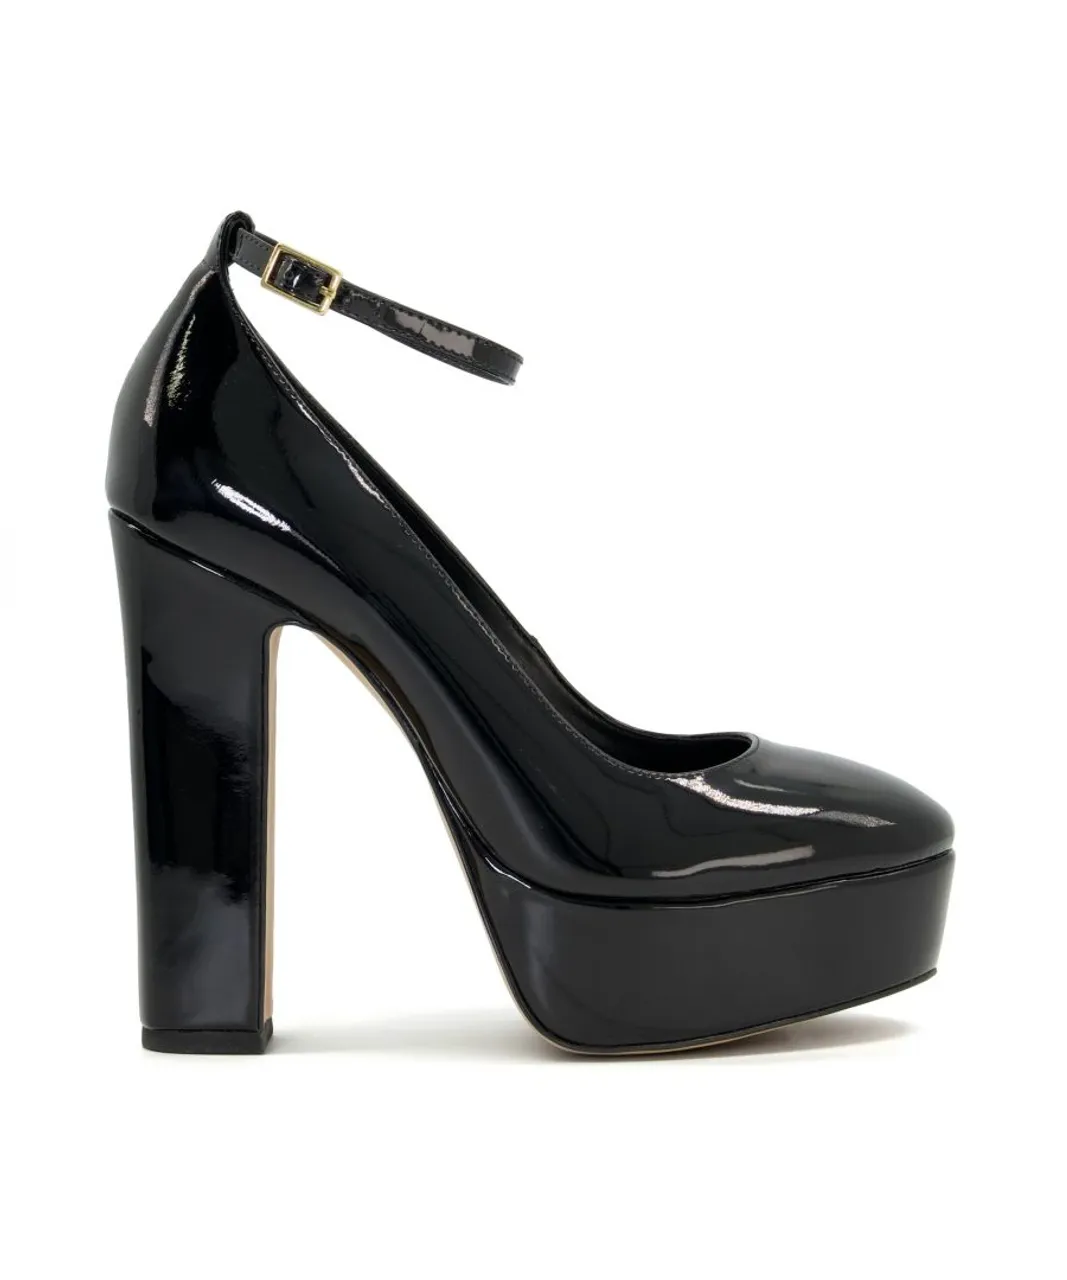 Dune London Womens Ladies ARTIST Ankle-Strap Leather Platform Courts - Black Leather (archived)